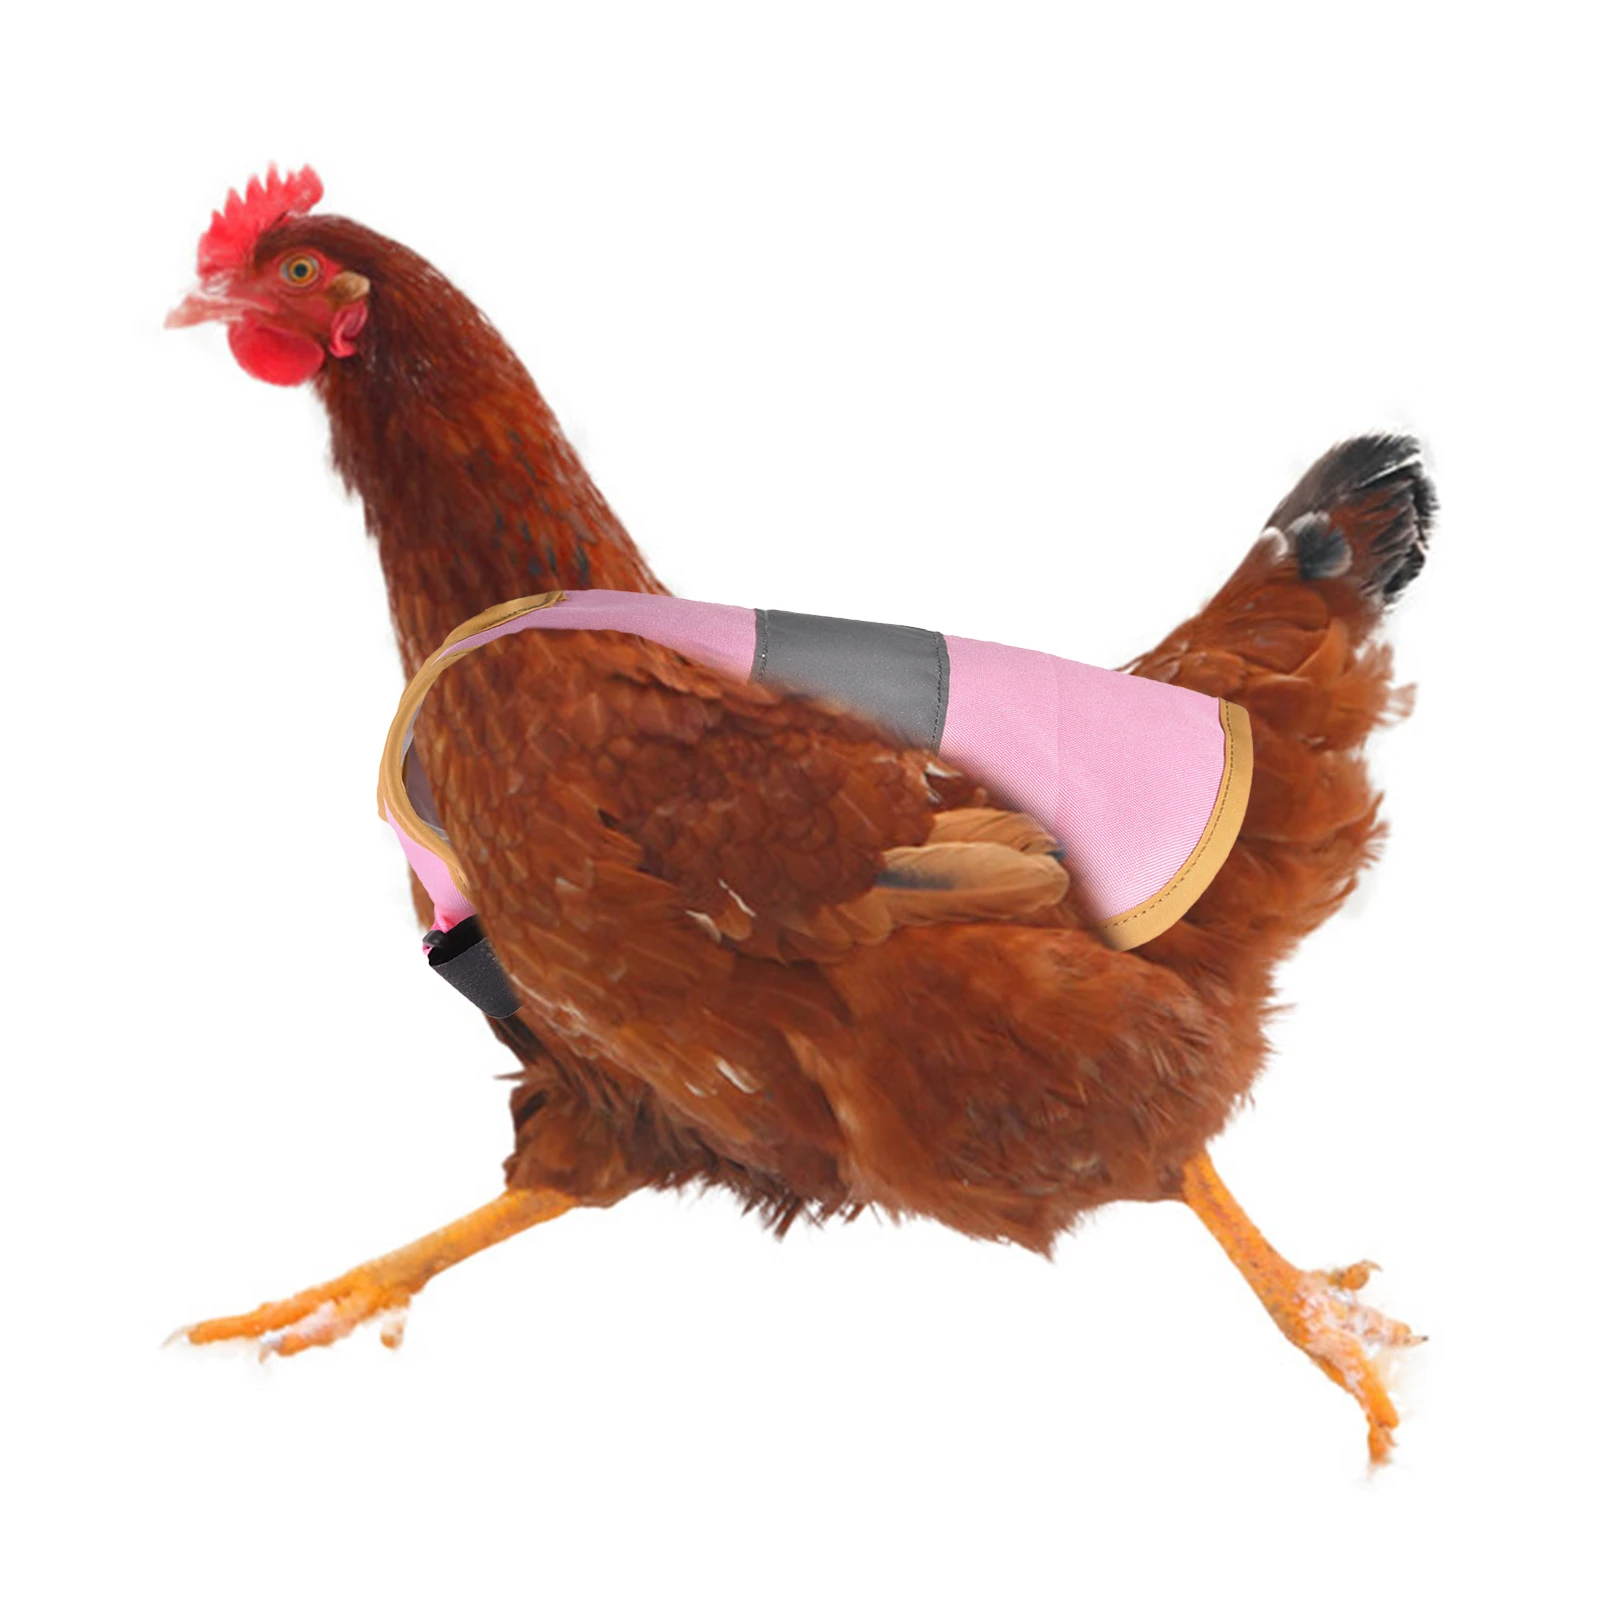 Chicken Saddle For Hens Poultry Apron With Single Strap Chicken Protection Suit For Small Medium Large Hen Ducks Black/Pink